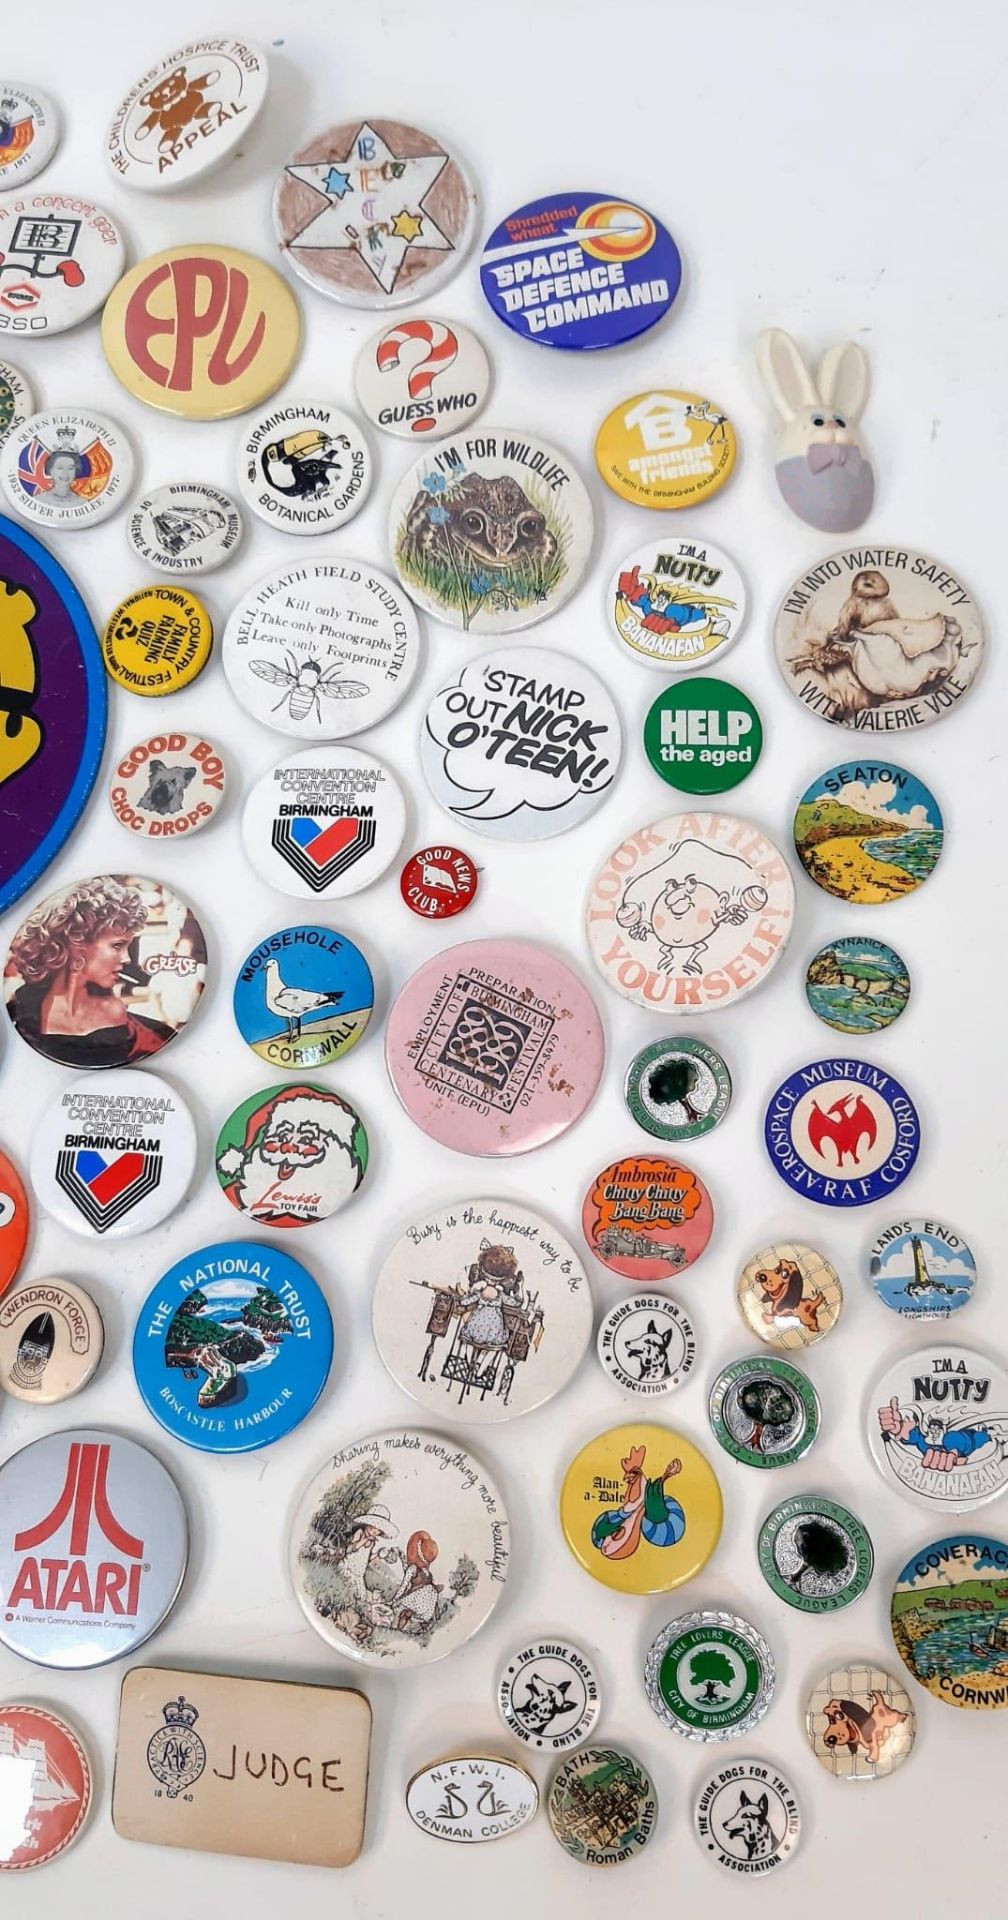 A Box of Vintage Pin Badges - Some absolute classics! - Image 3 of 8